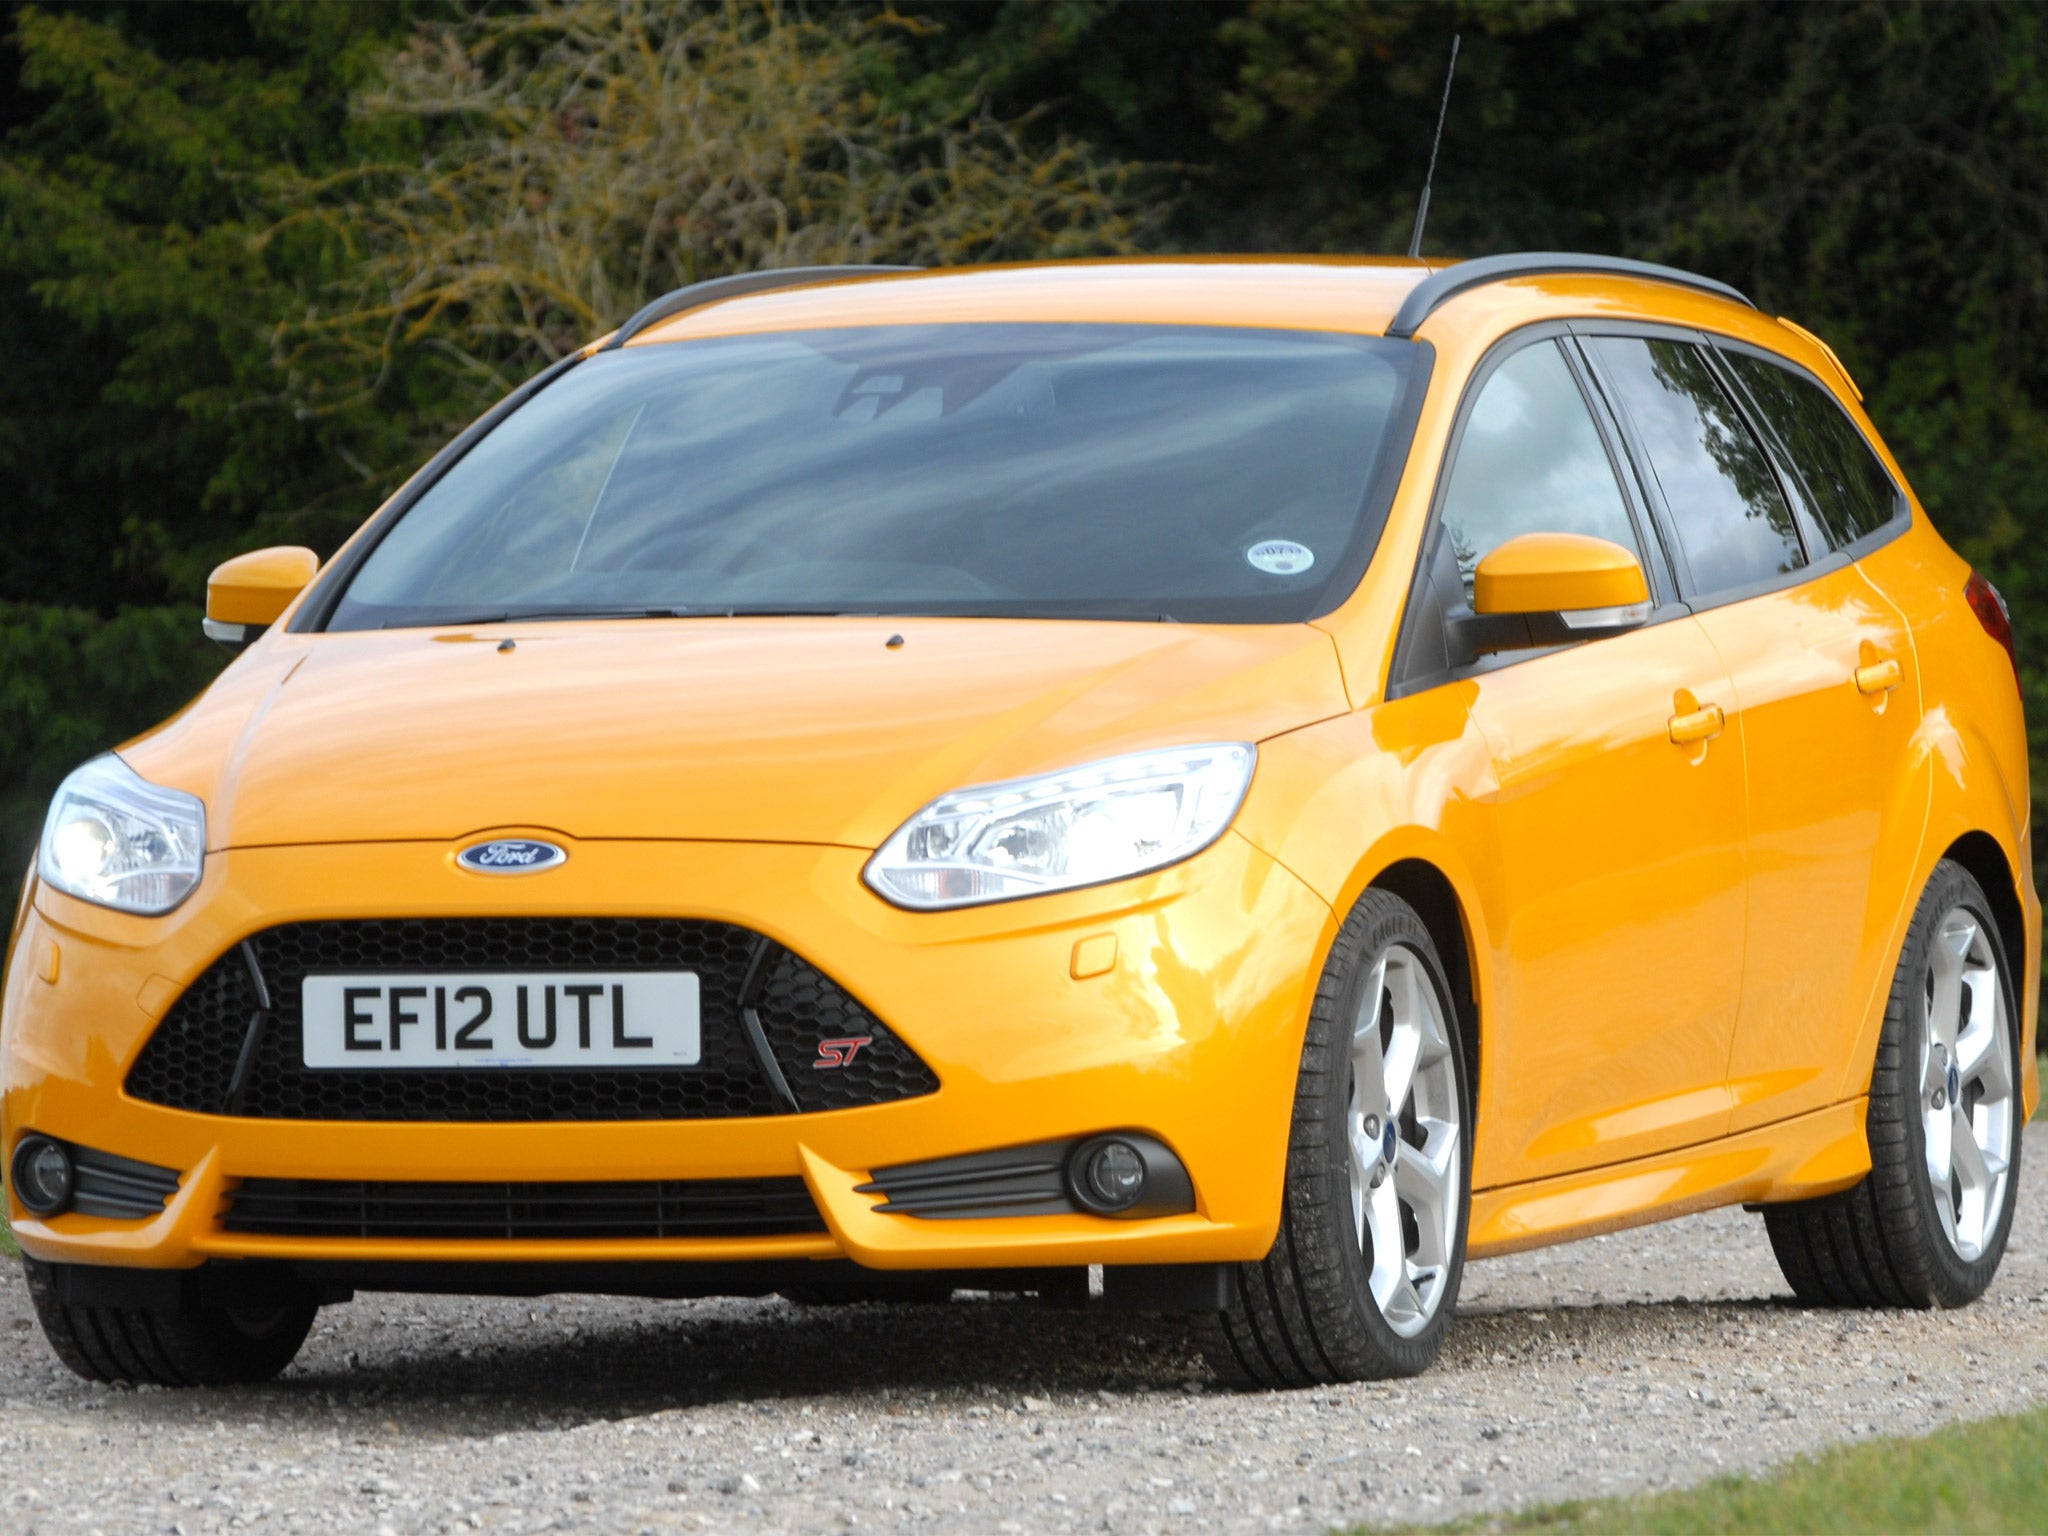 Sturdy, functional and pretty cool: The new Focus ST